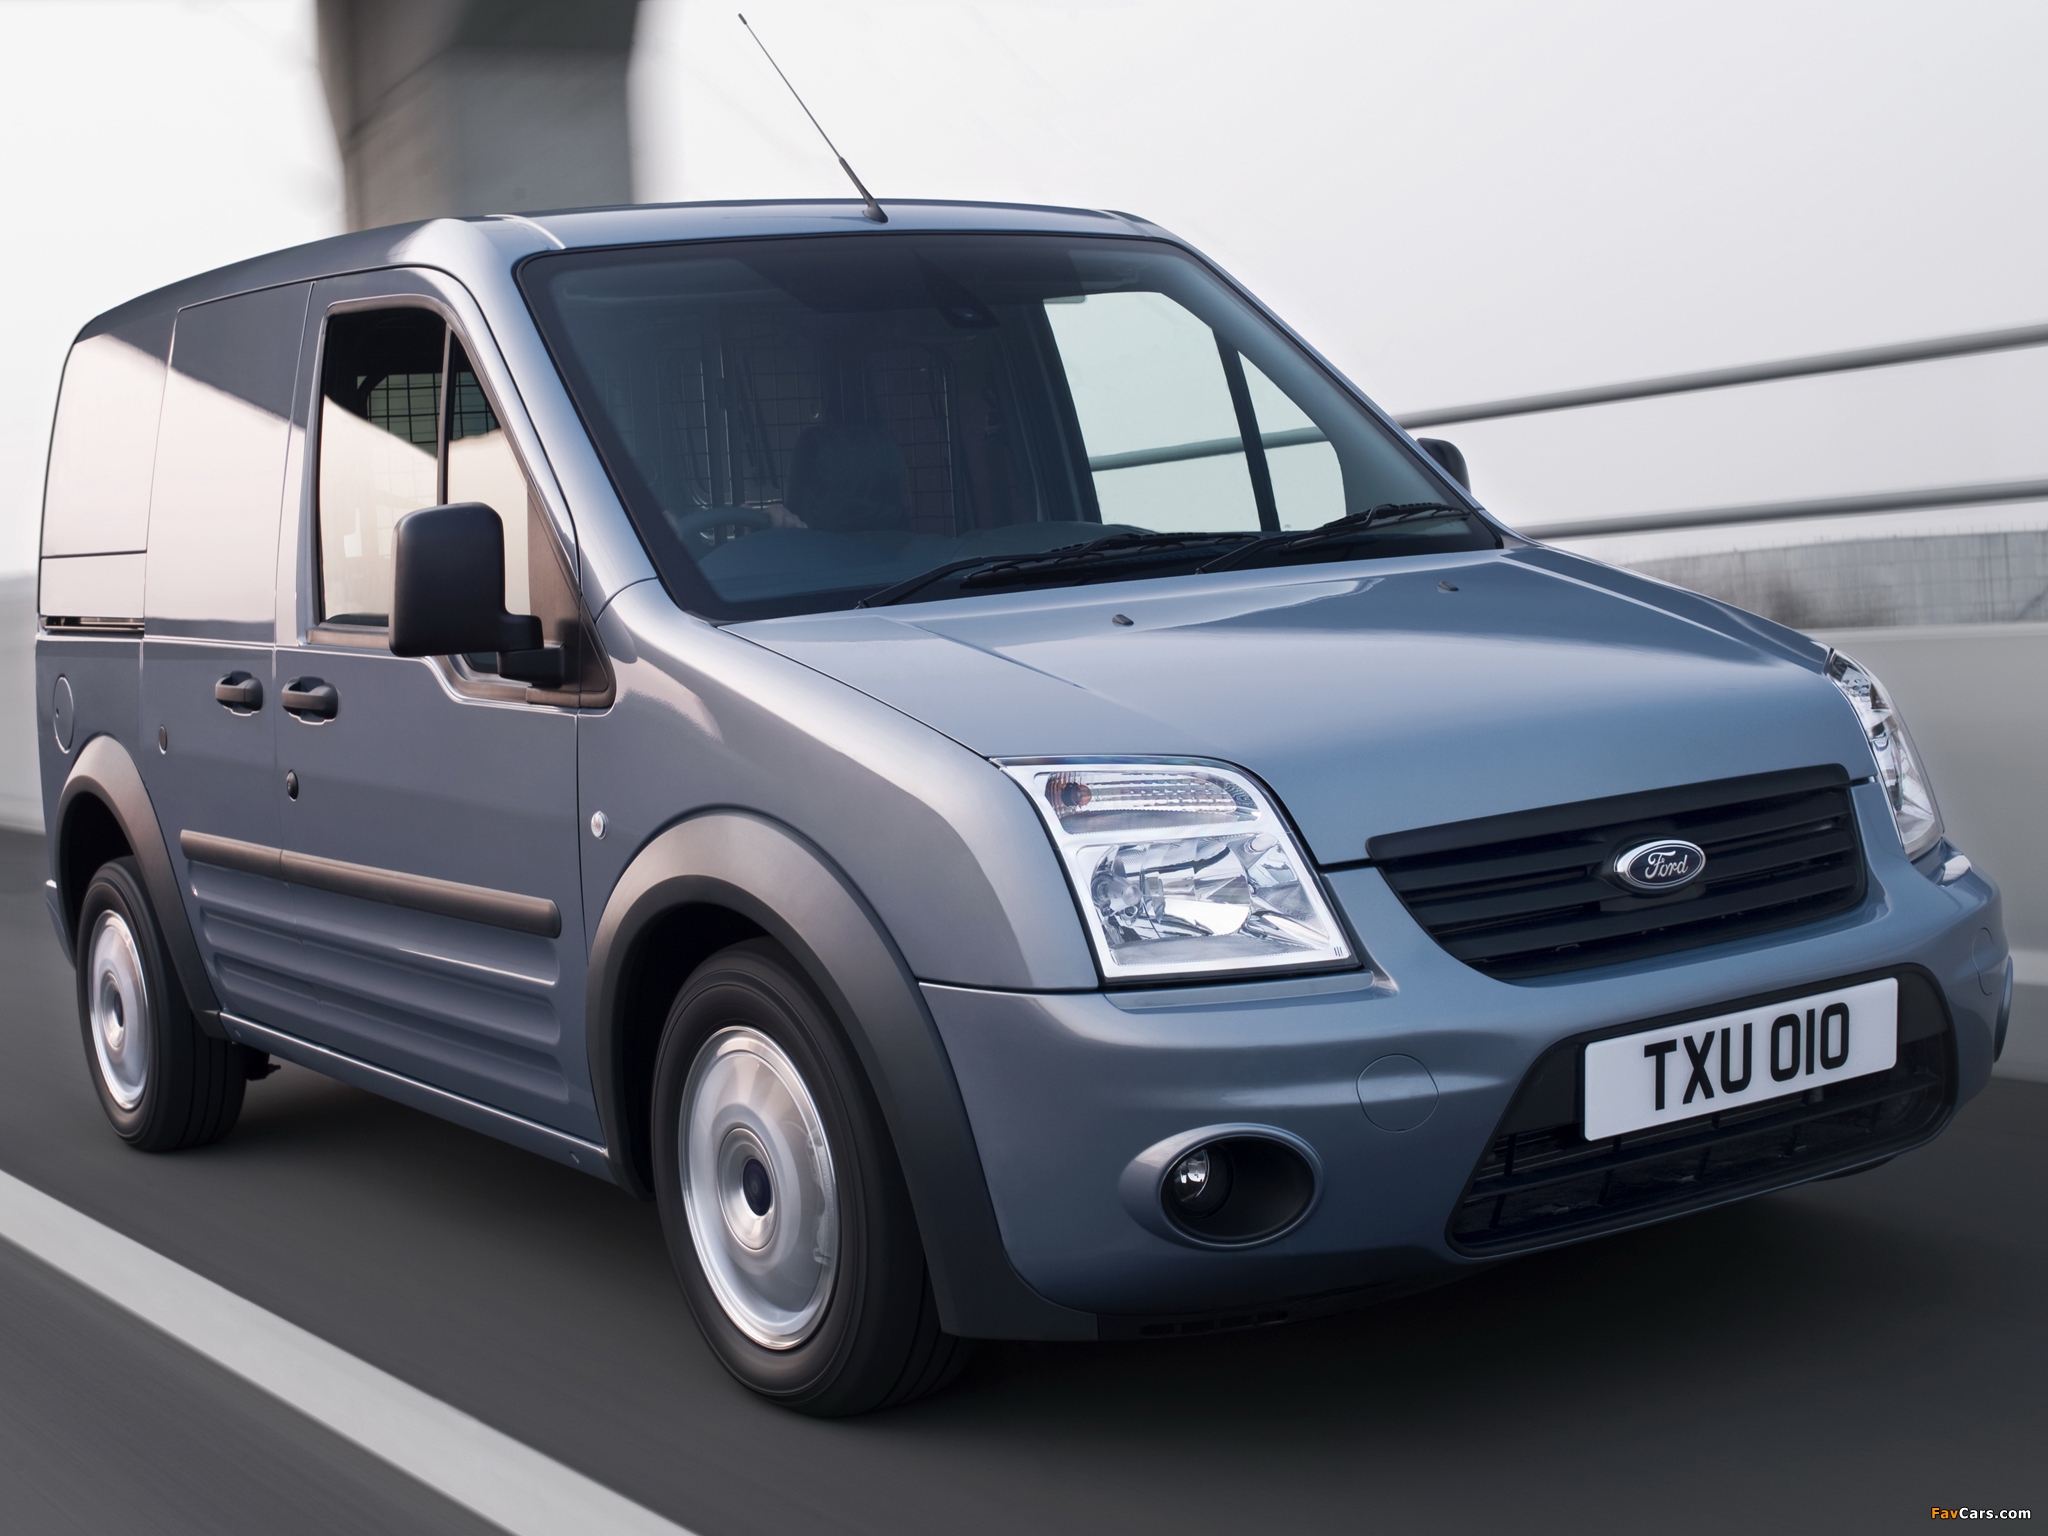 Форд транзит 1 купить. Форд Transit connect. Ford connect 1.8 TDCI. Ford connect 2009. Ford Transit connect tc7 2002-2013.